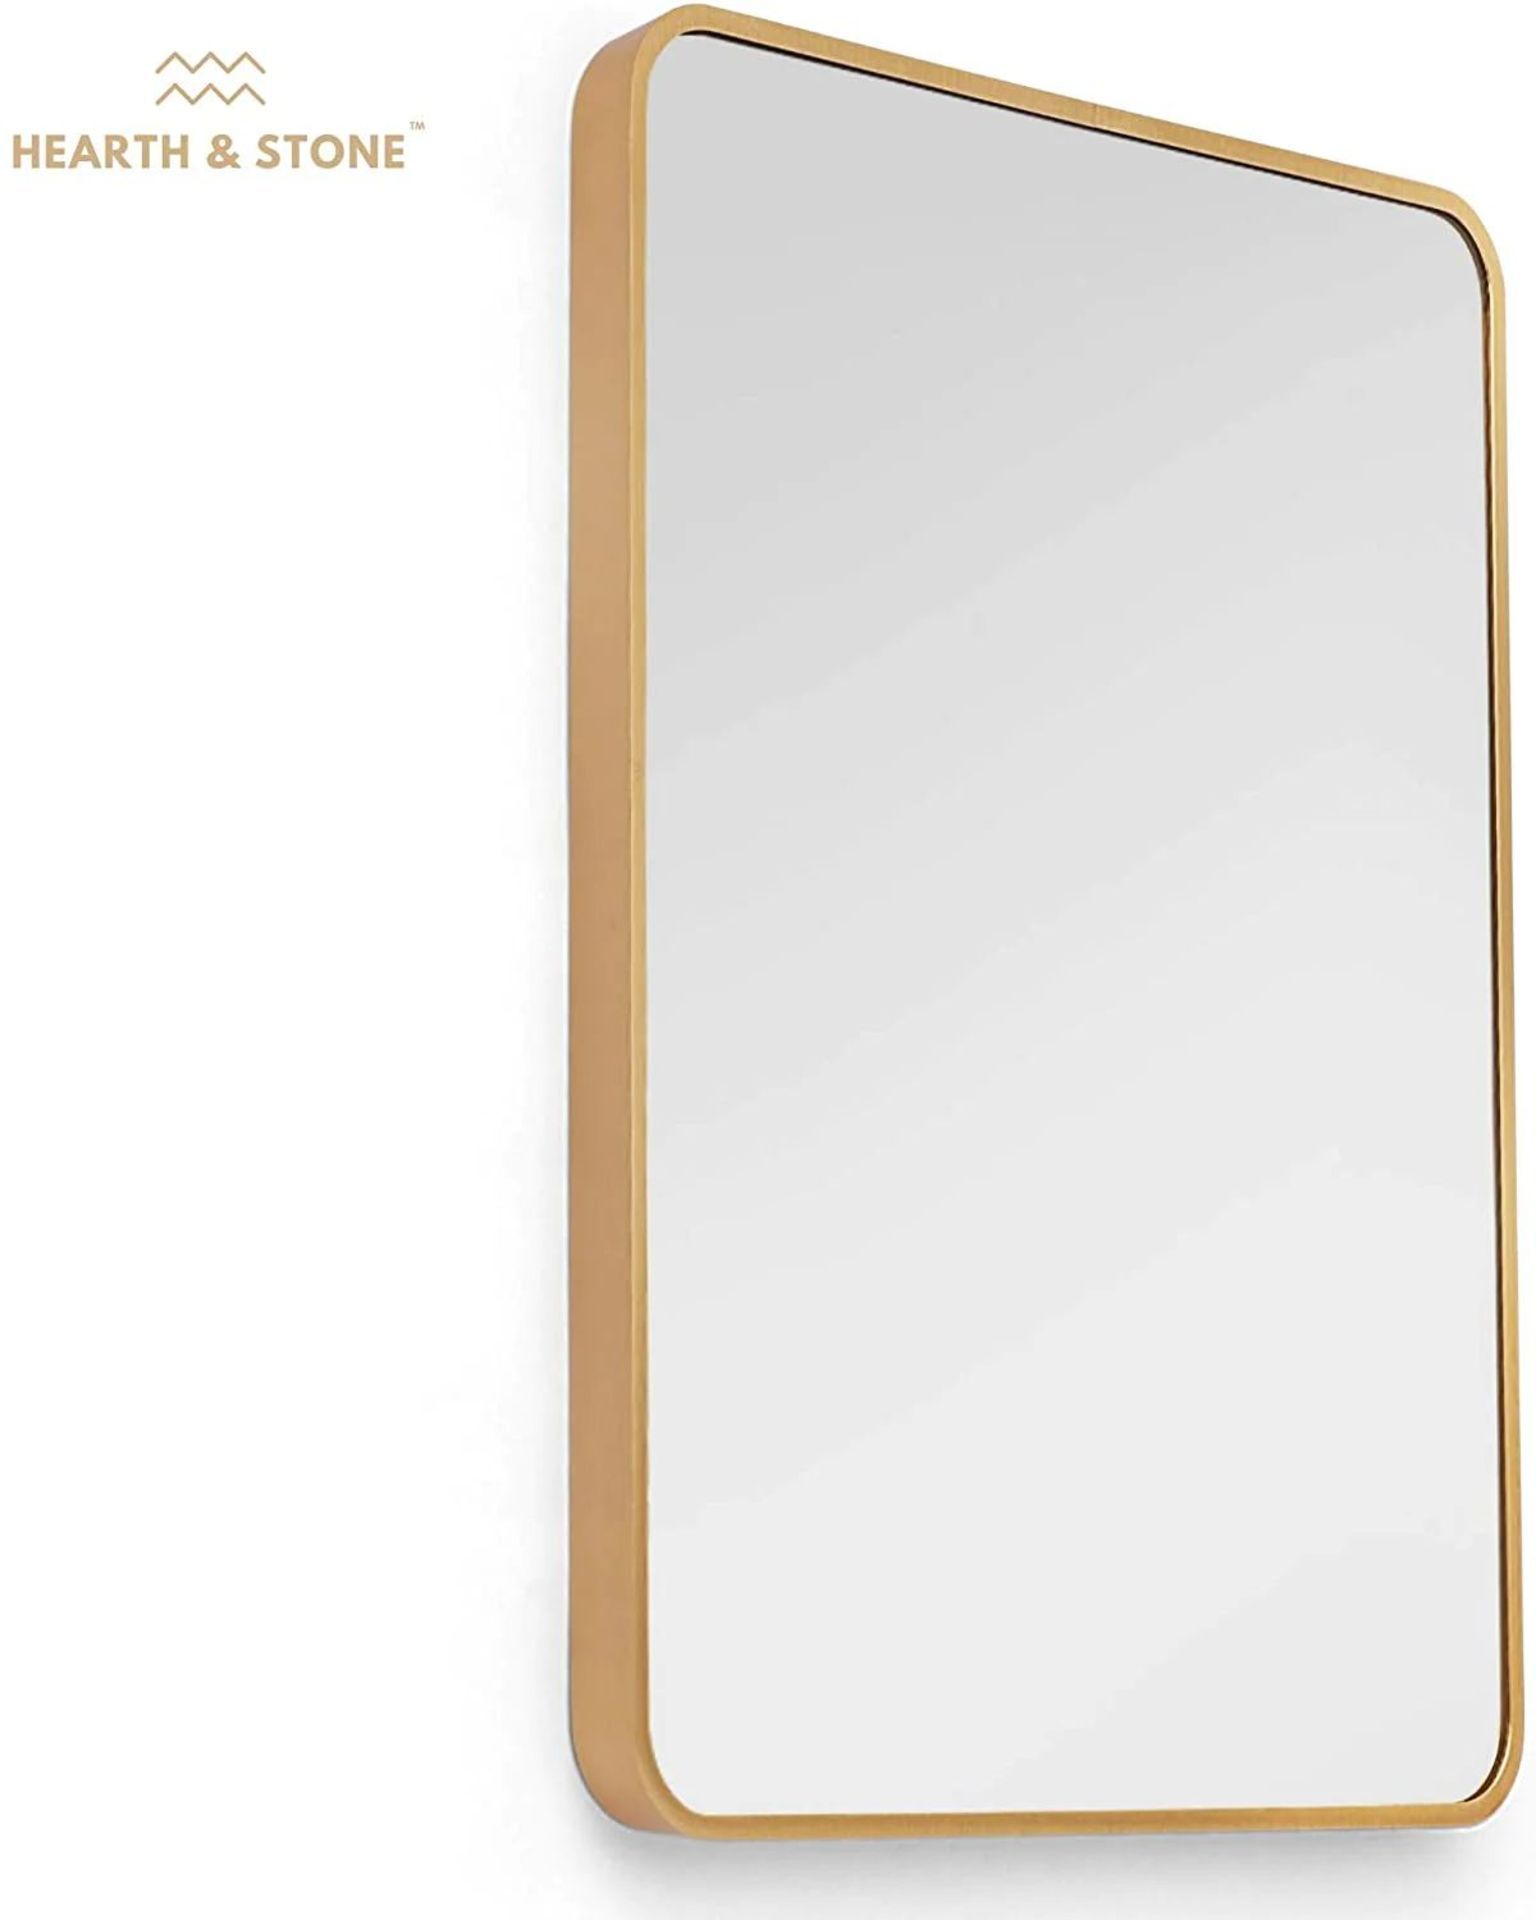 BRAND NEW HEARTH AND STONE LUXURY GOLD FRAMED MIRROR RRP £199 R18.10/3.7 - Image 2 of 2